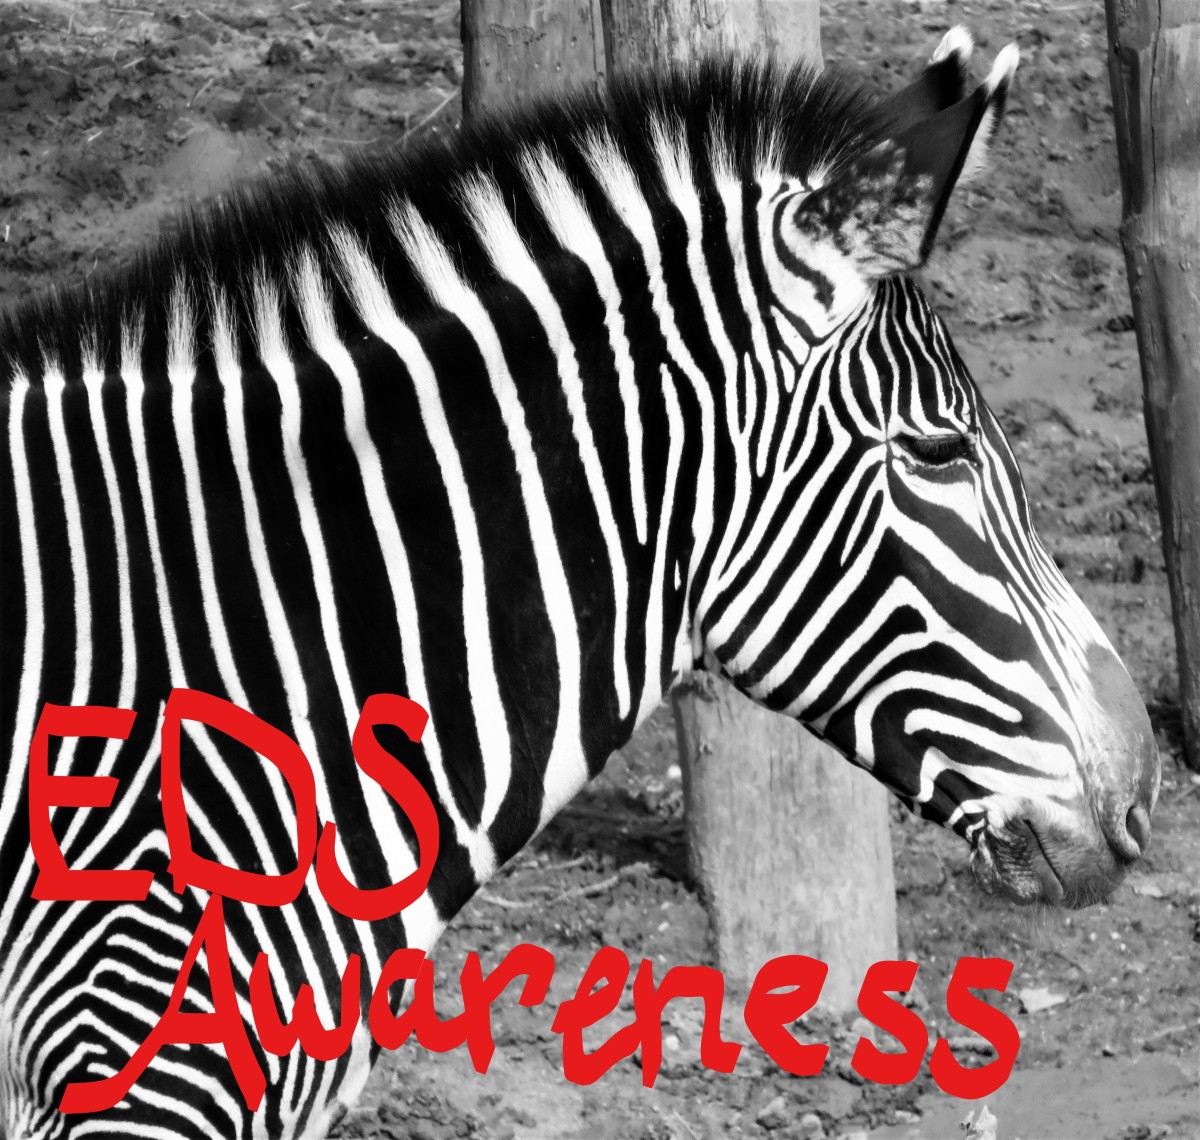 Those with EDS have the beautiful Zebra as our symbol. This one lives in Paris - no really!